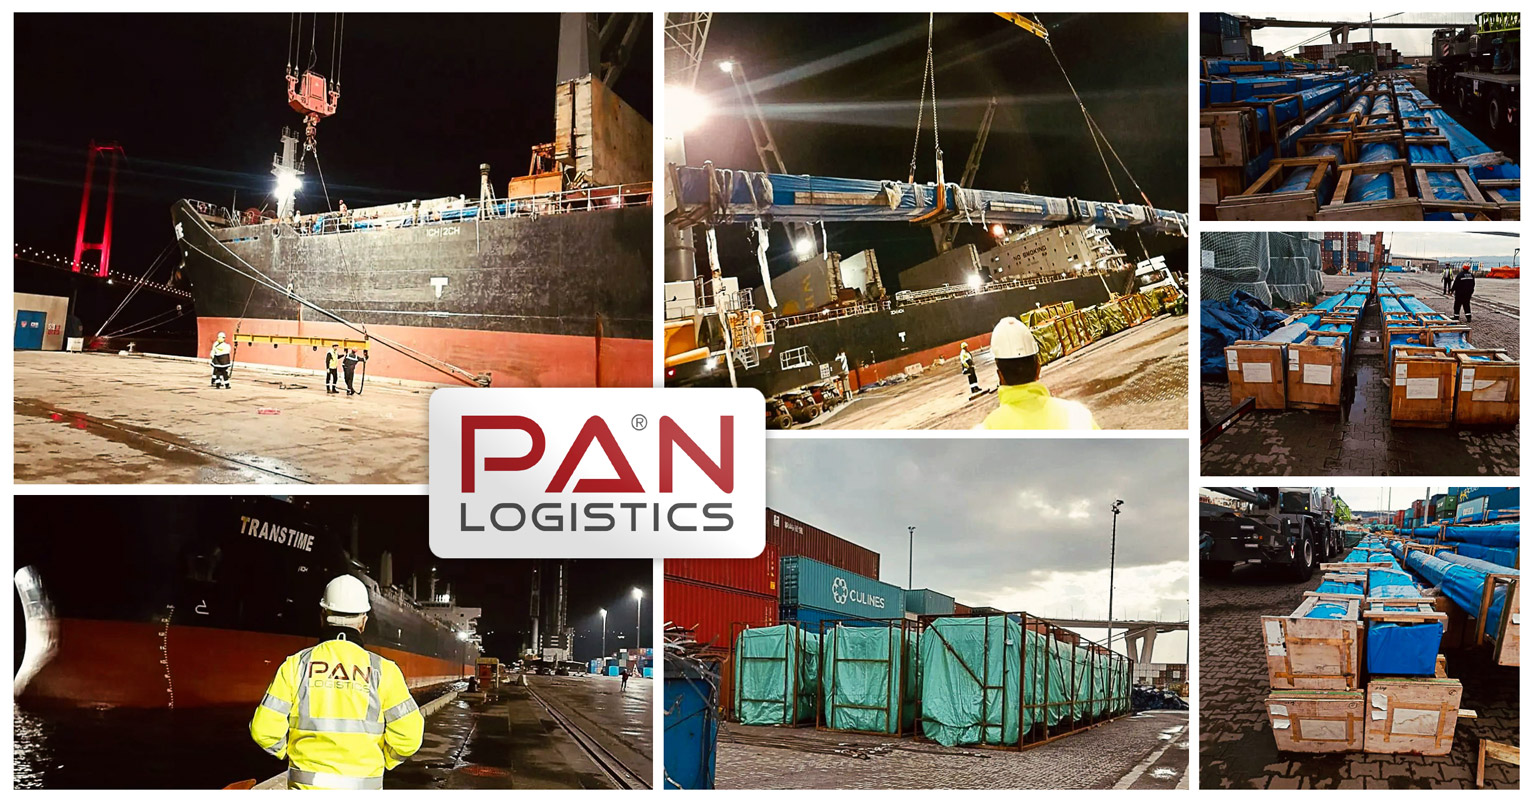 Pan Logistics Shipped Under Own Charter & Delivered to Door 54 x 26m Long Aluminum Profiles & 3 High Speed Train Wagons from South Korea to Belde Port